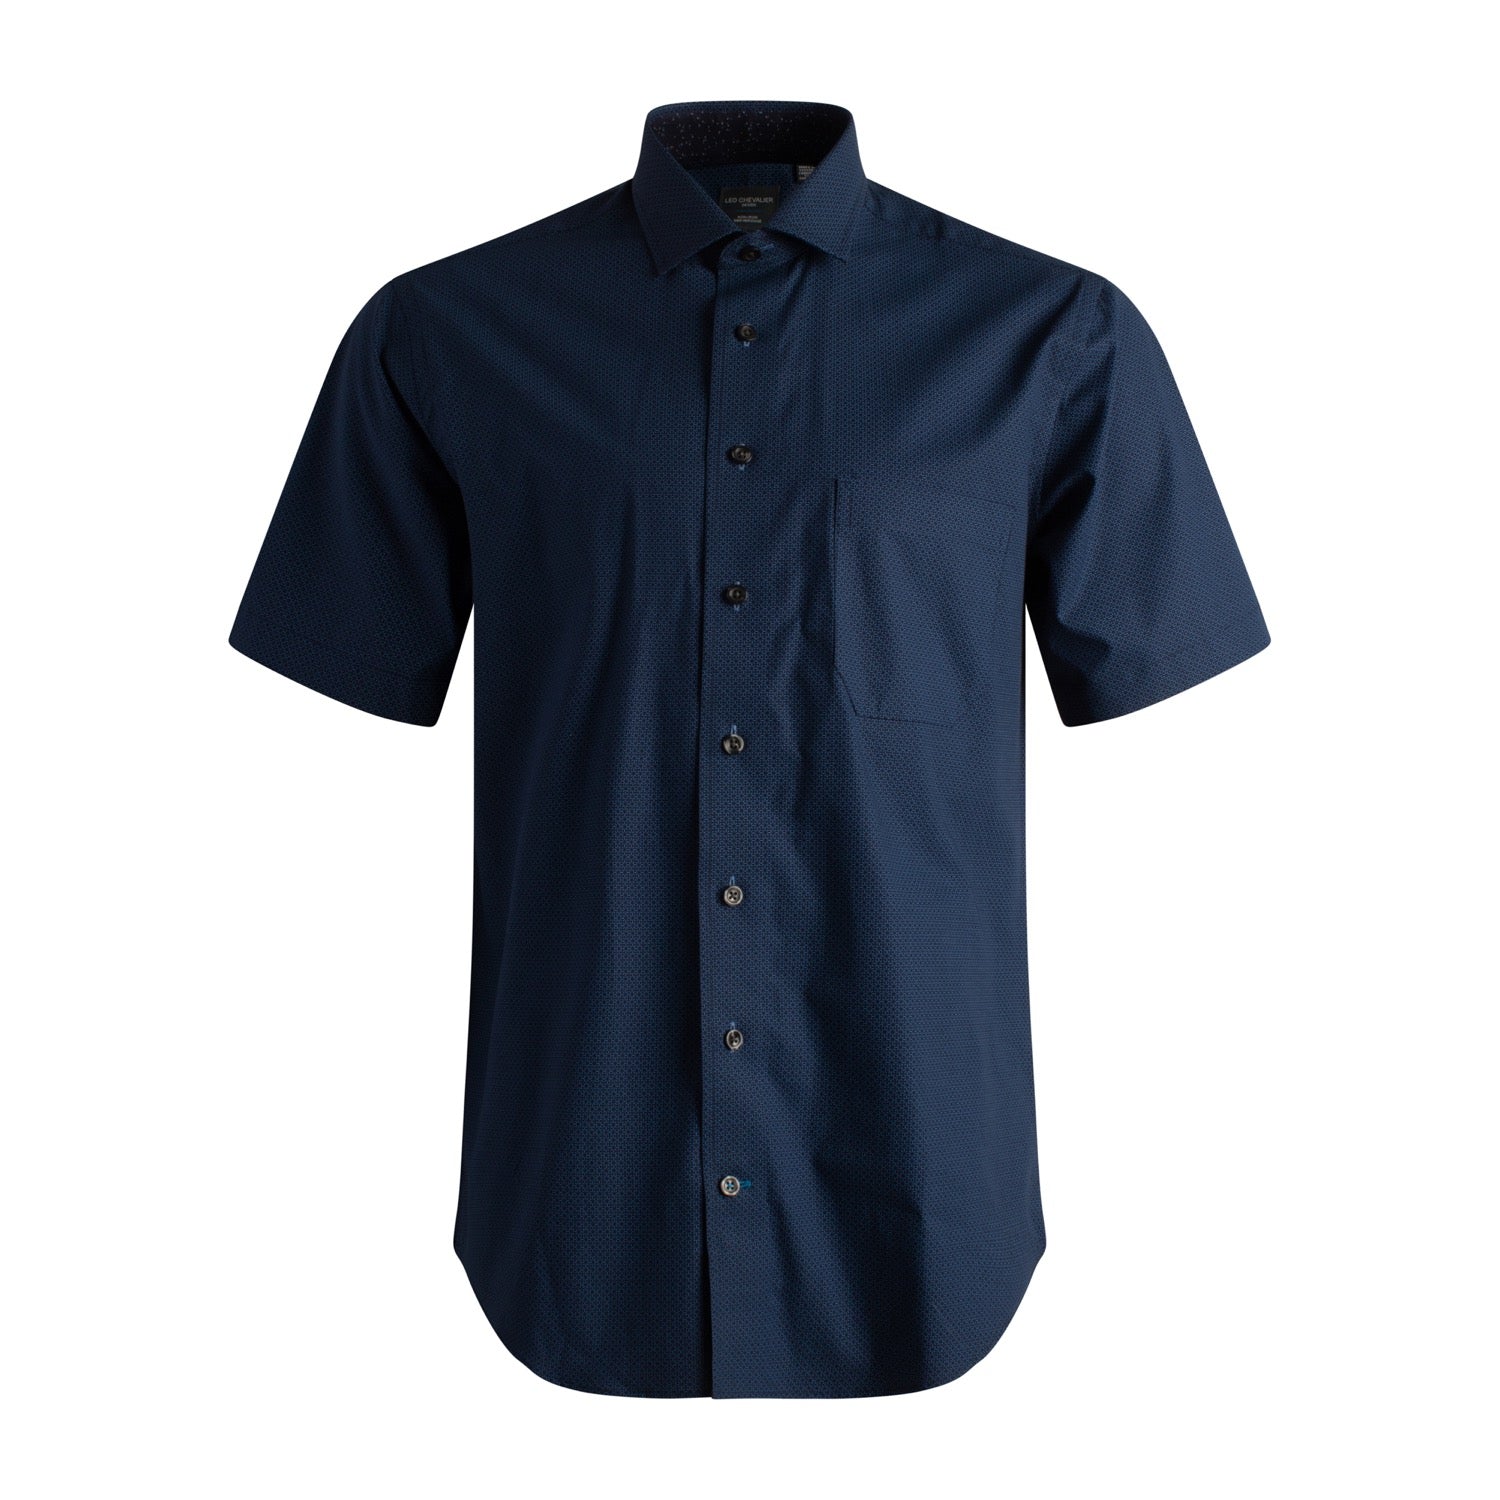 Navy Neat Print Short Sleeve No-Iron Cotton Sport Shirt with Spread Collar by Leo Chevalier